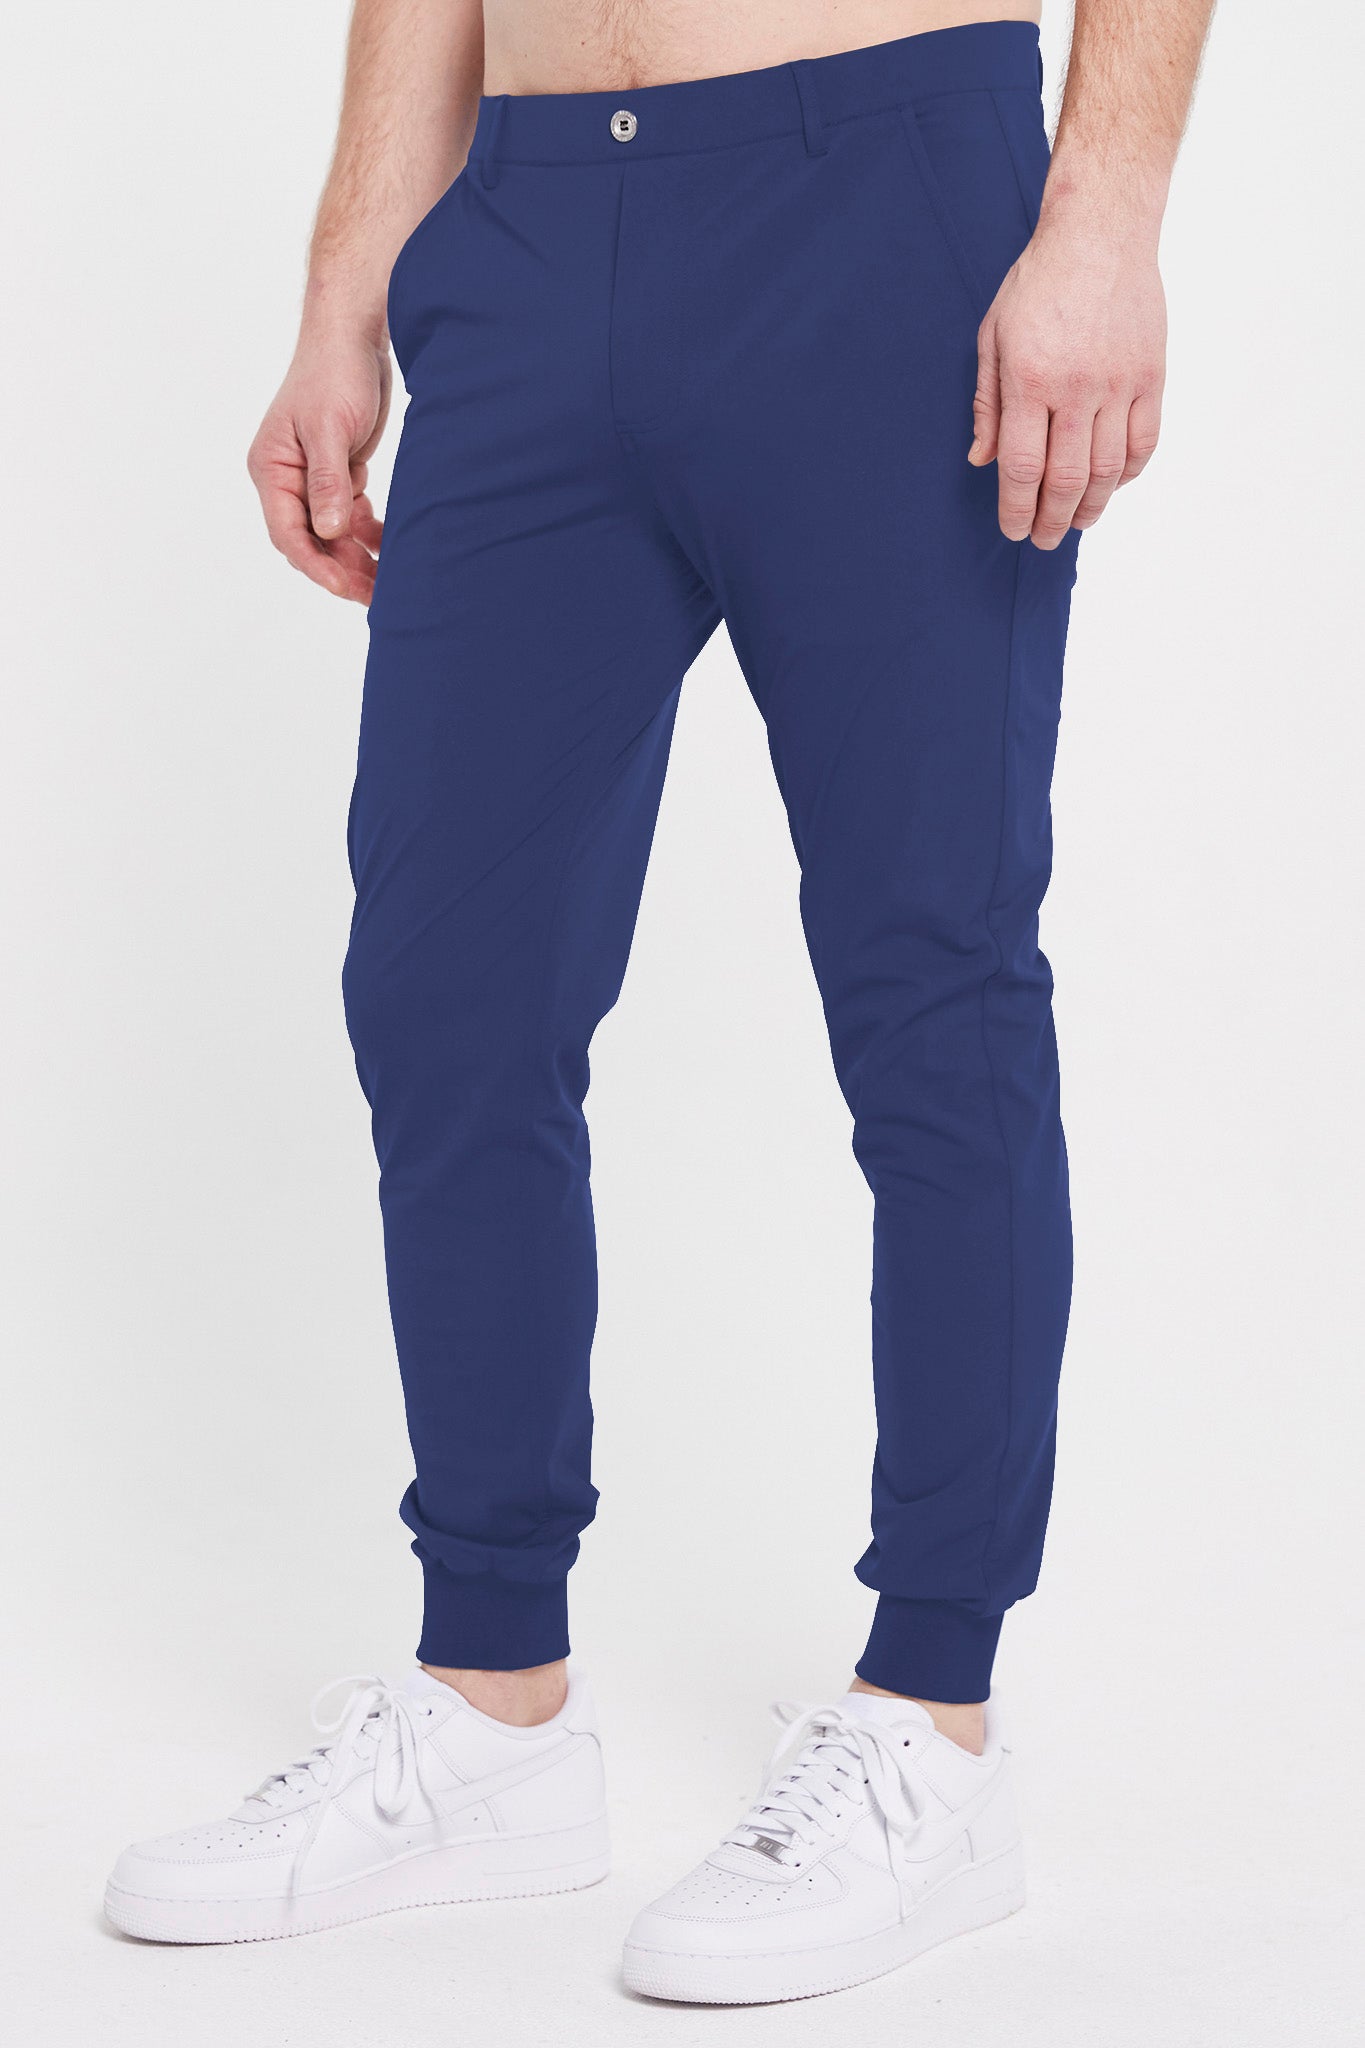 Image of the halliday pull-on jogger in navy 1